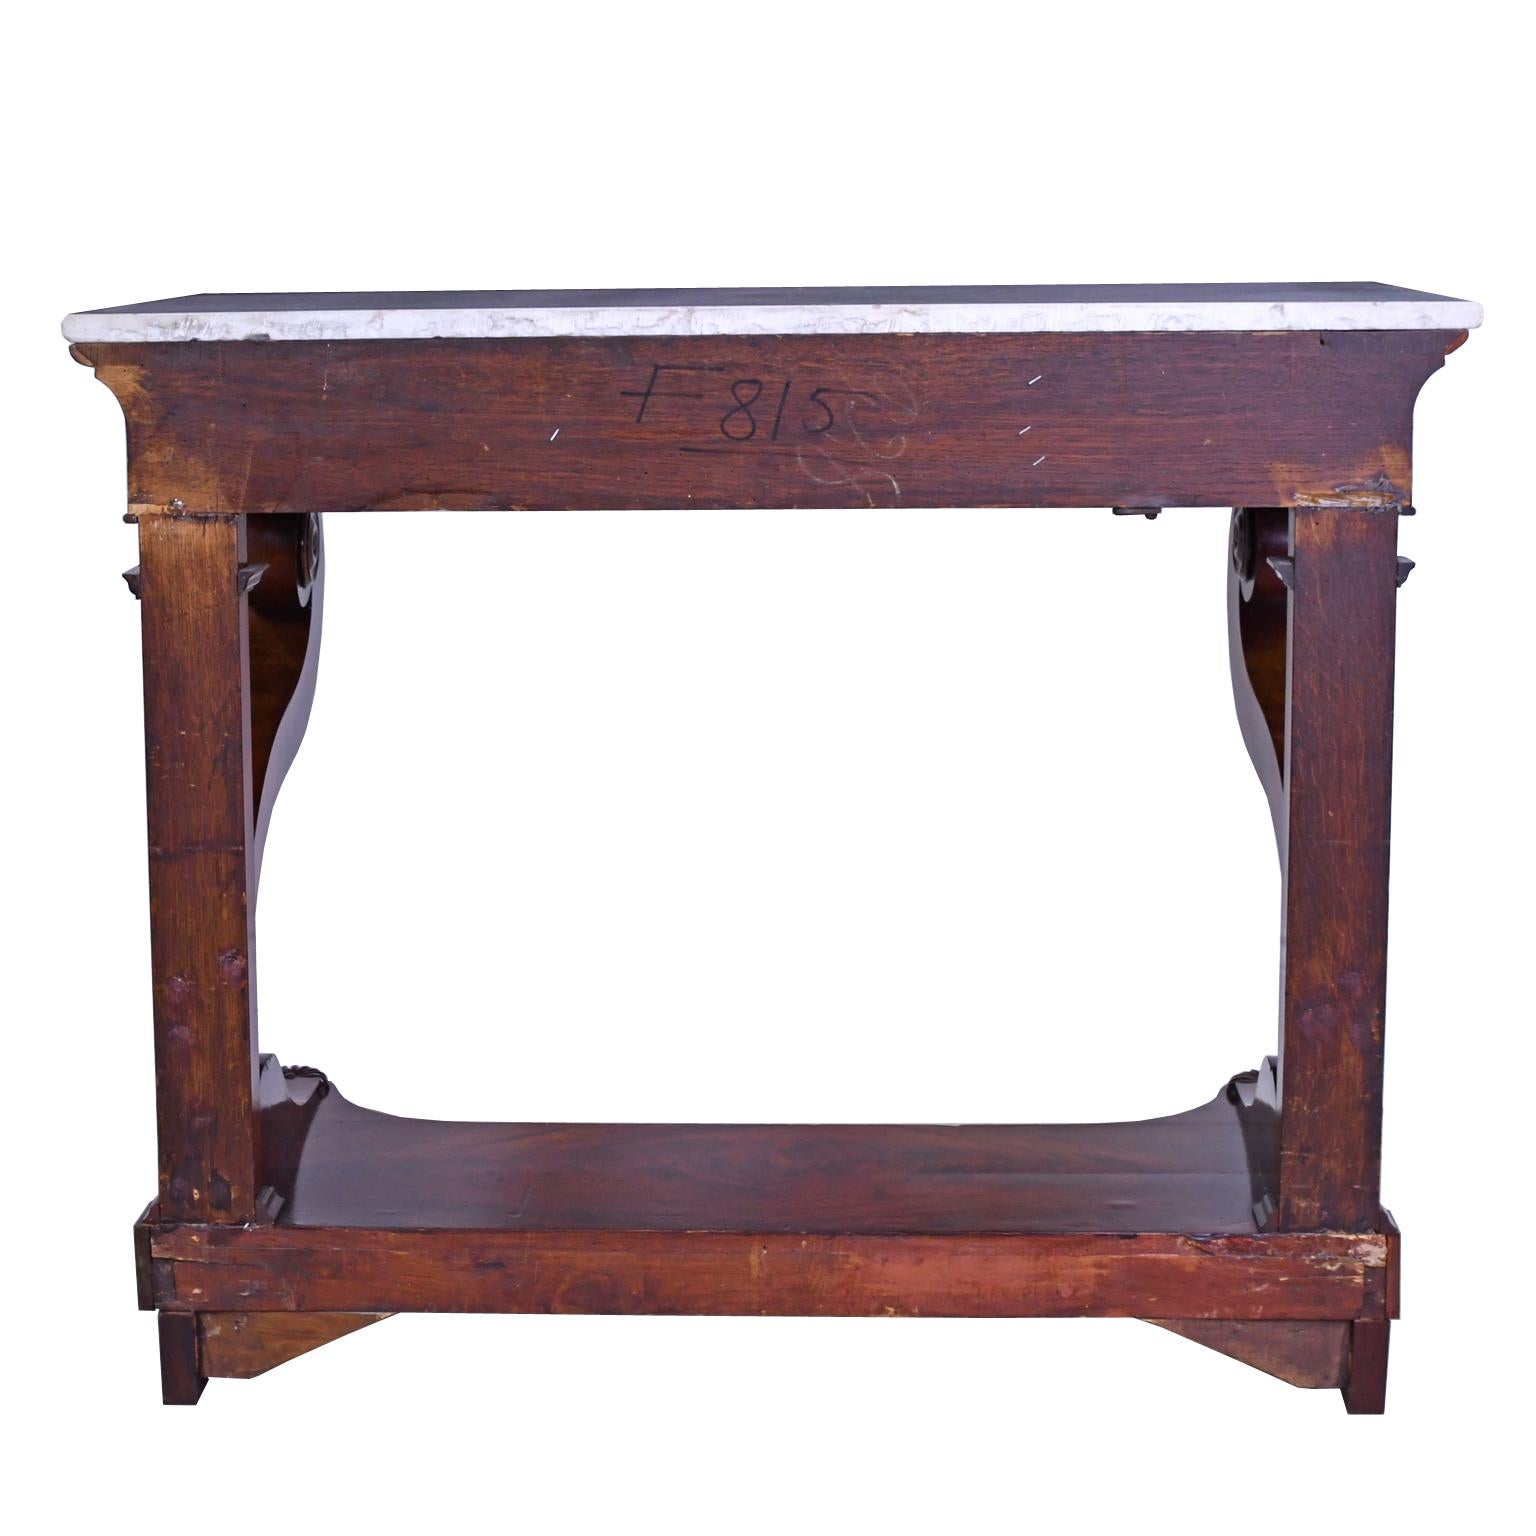 Early 19th Century French Charles X Console Table in West Indies Mahogany with White Marble